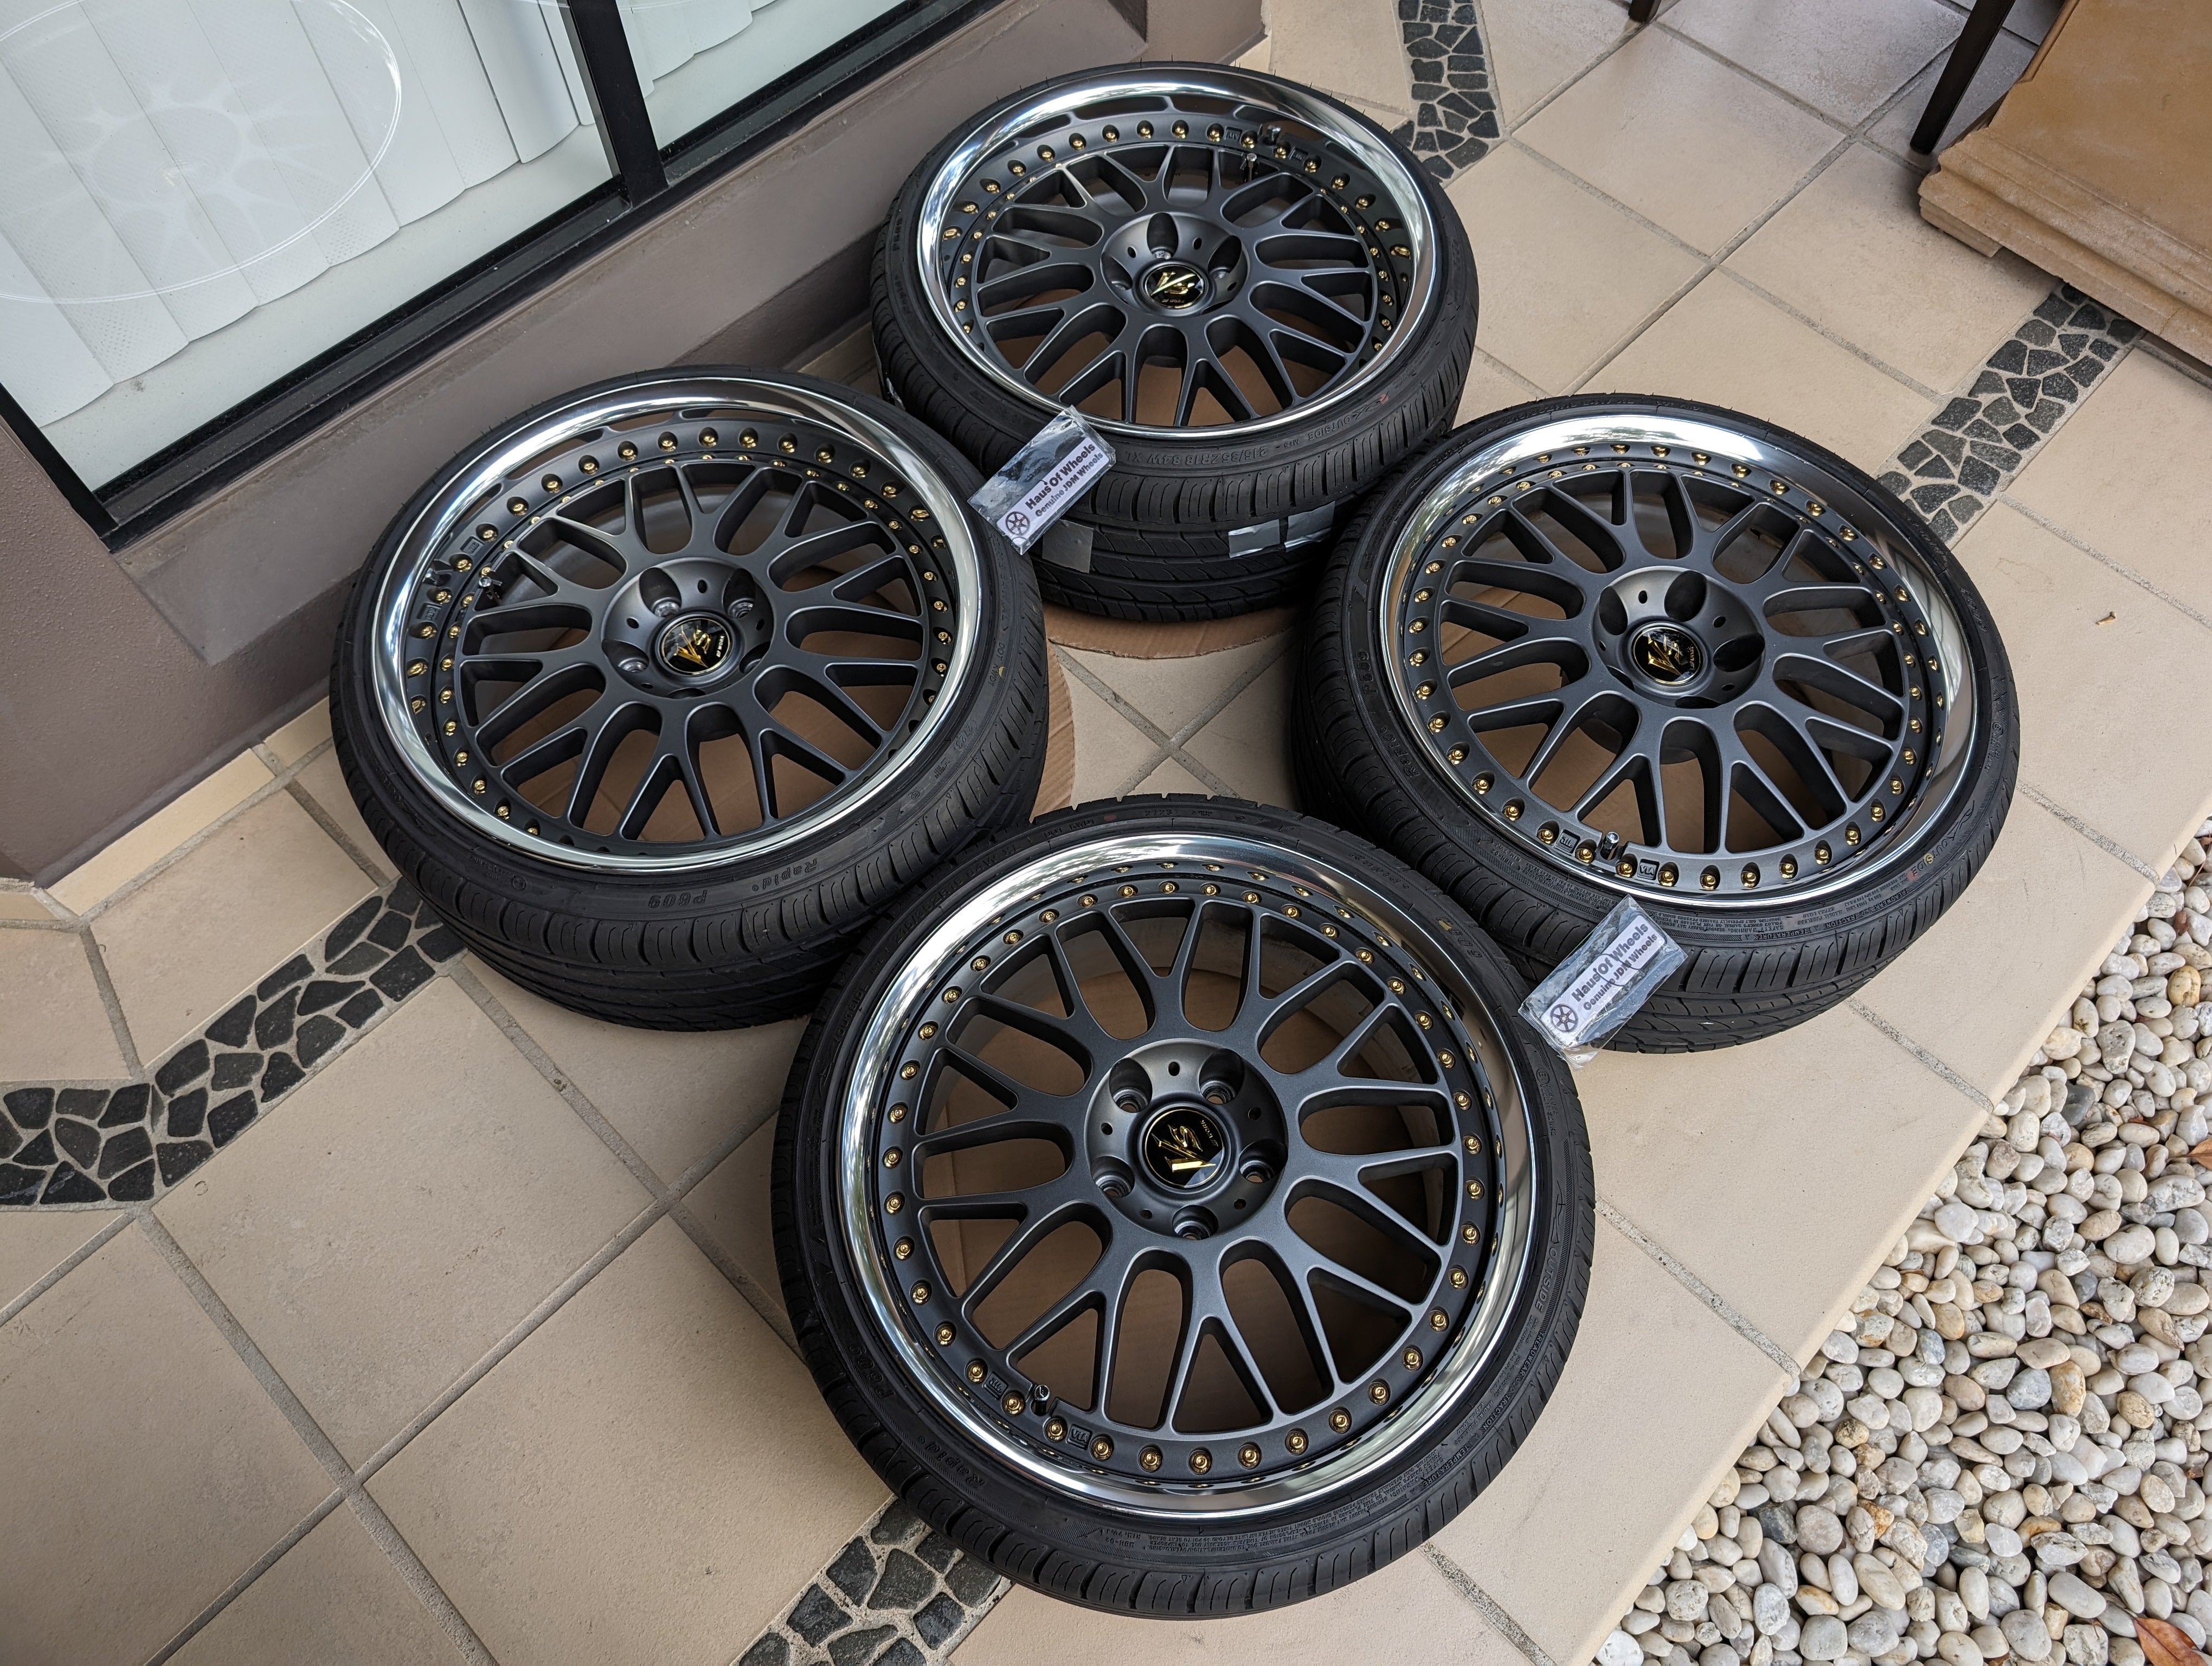 *Rare* Work VS-XX with Genuine Work VS Center Caps and Tyres - 5x114.3 - F: 18x8 +34 (R-Disk) - R: 18x9 +33 (O-Disk)